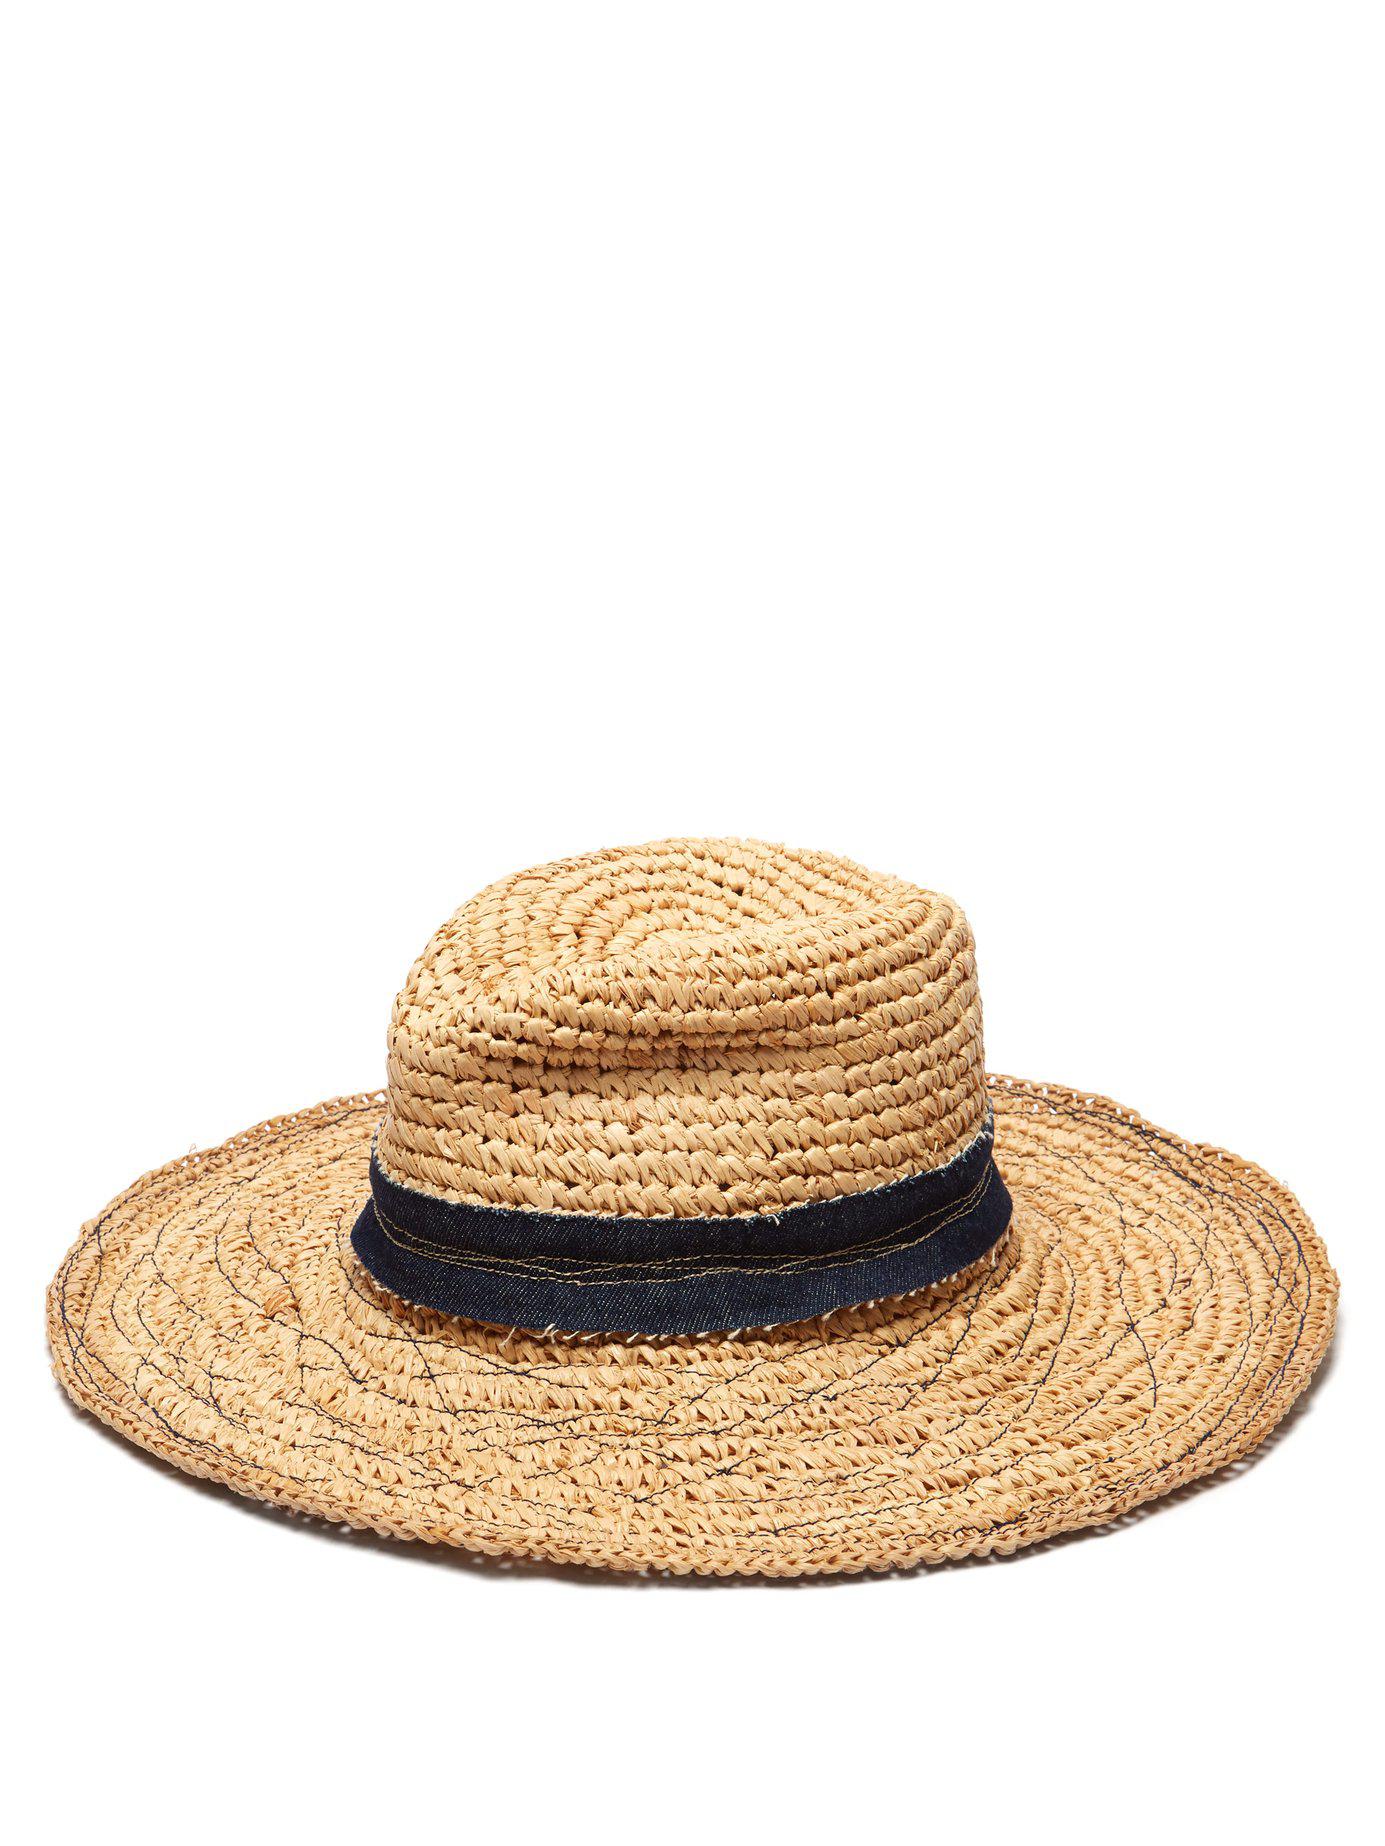 Lola Hats Mama Tarboush Wide Brim Straw Hat in Natural - Lyst